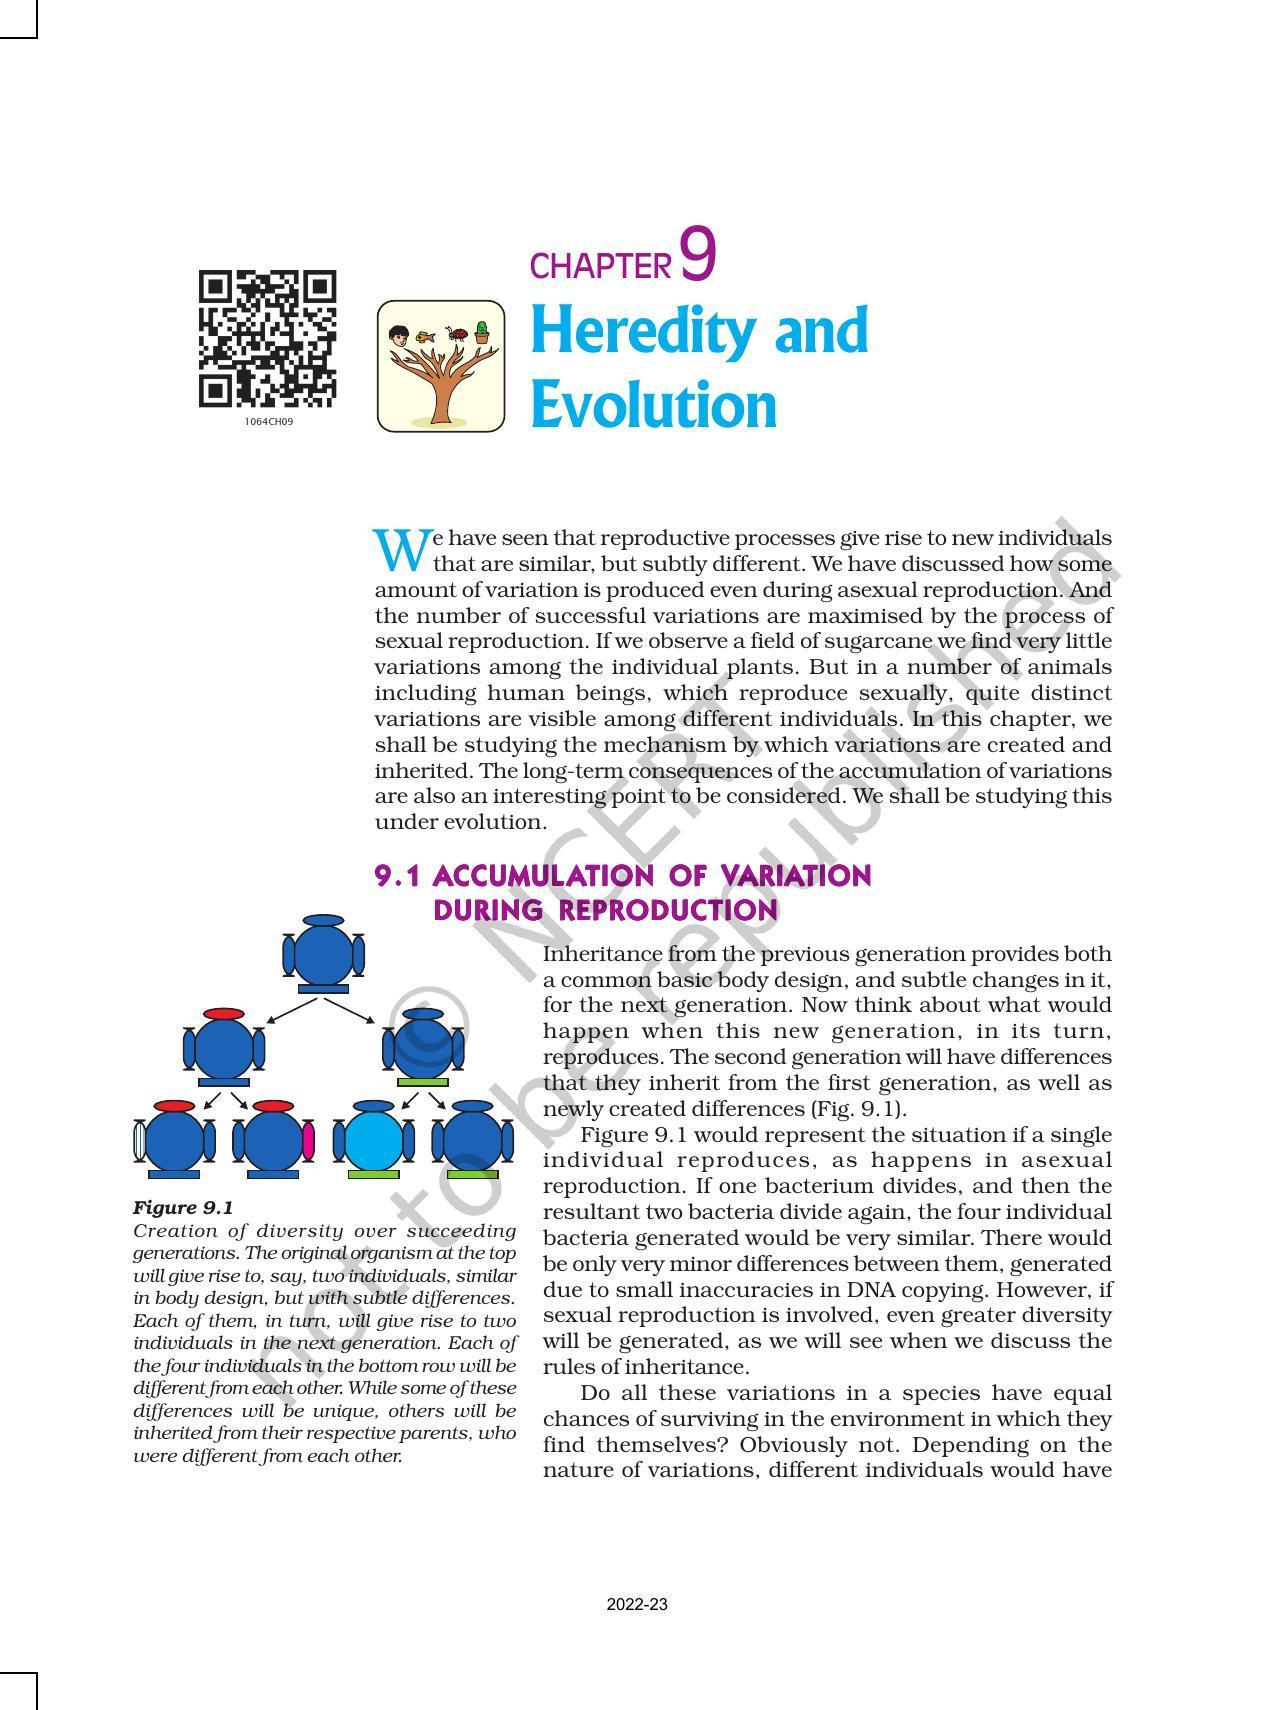 NCERT Book for Class 10 Science Chapter 9 Heredity and Evolution - Page 1